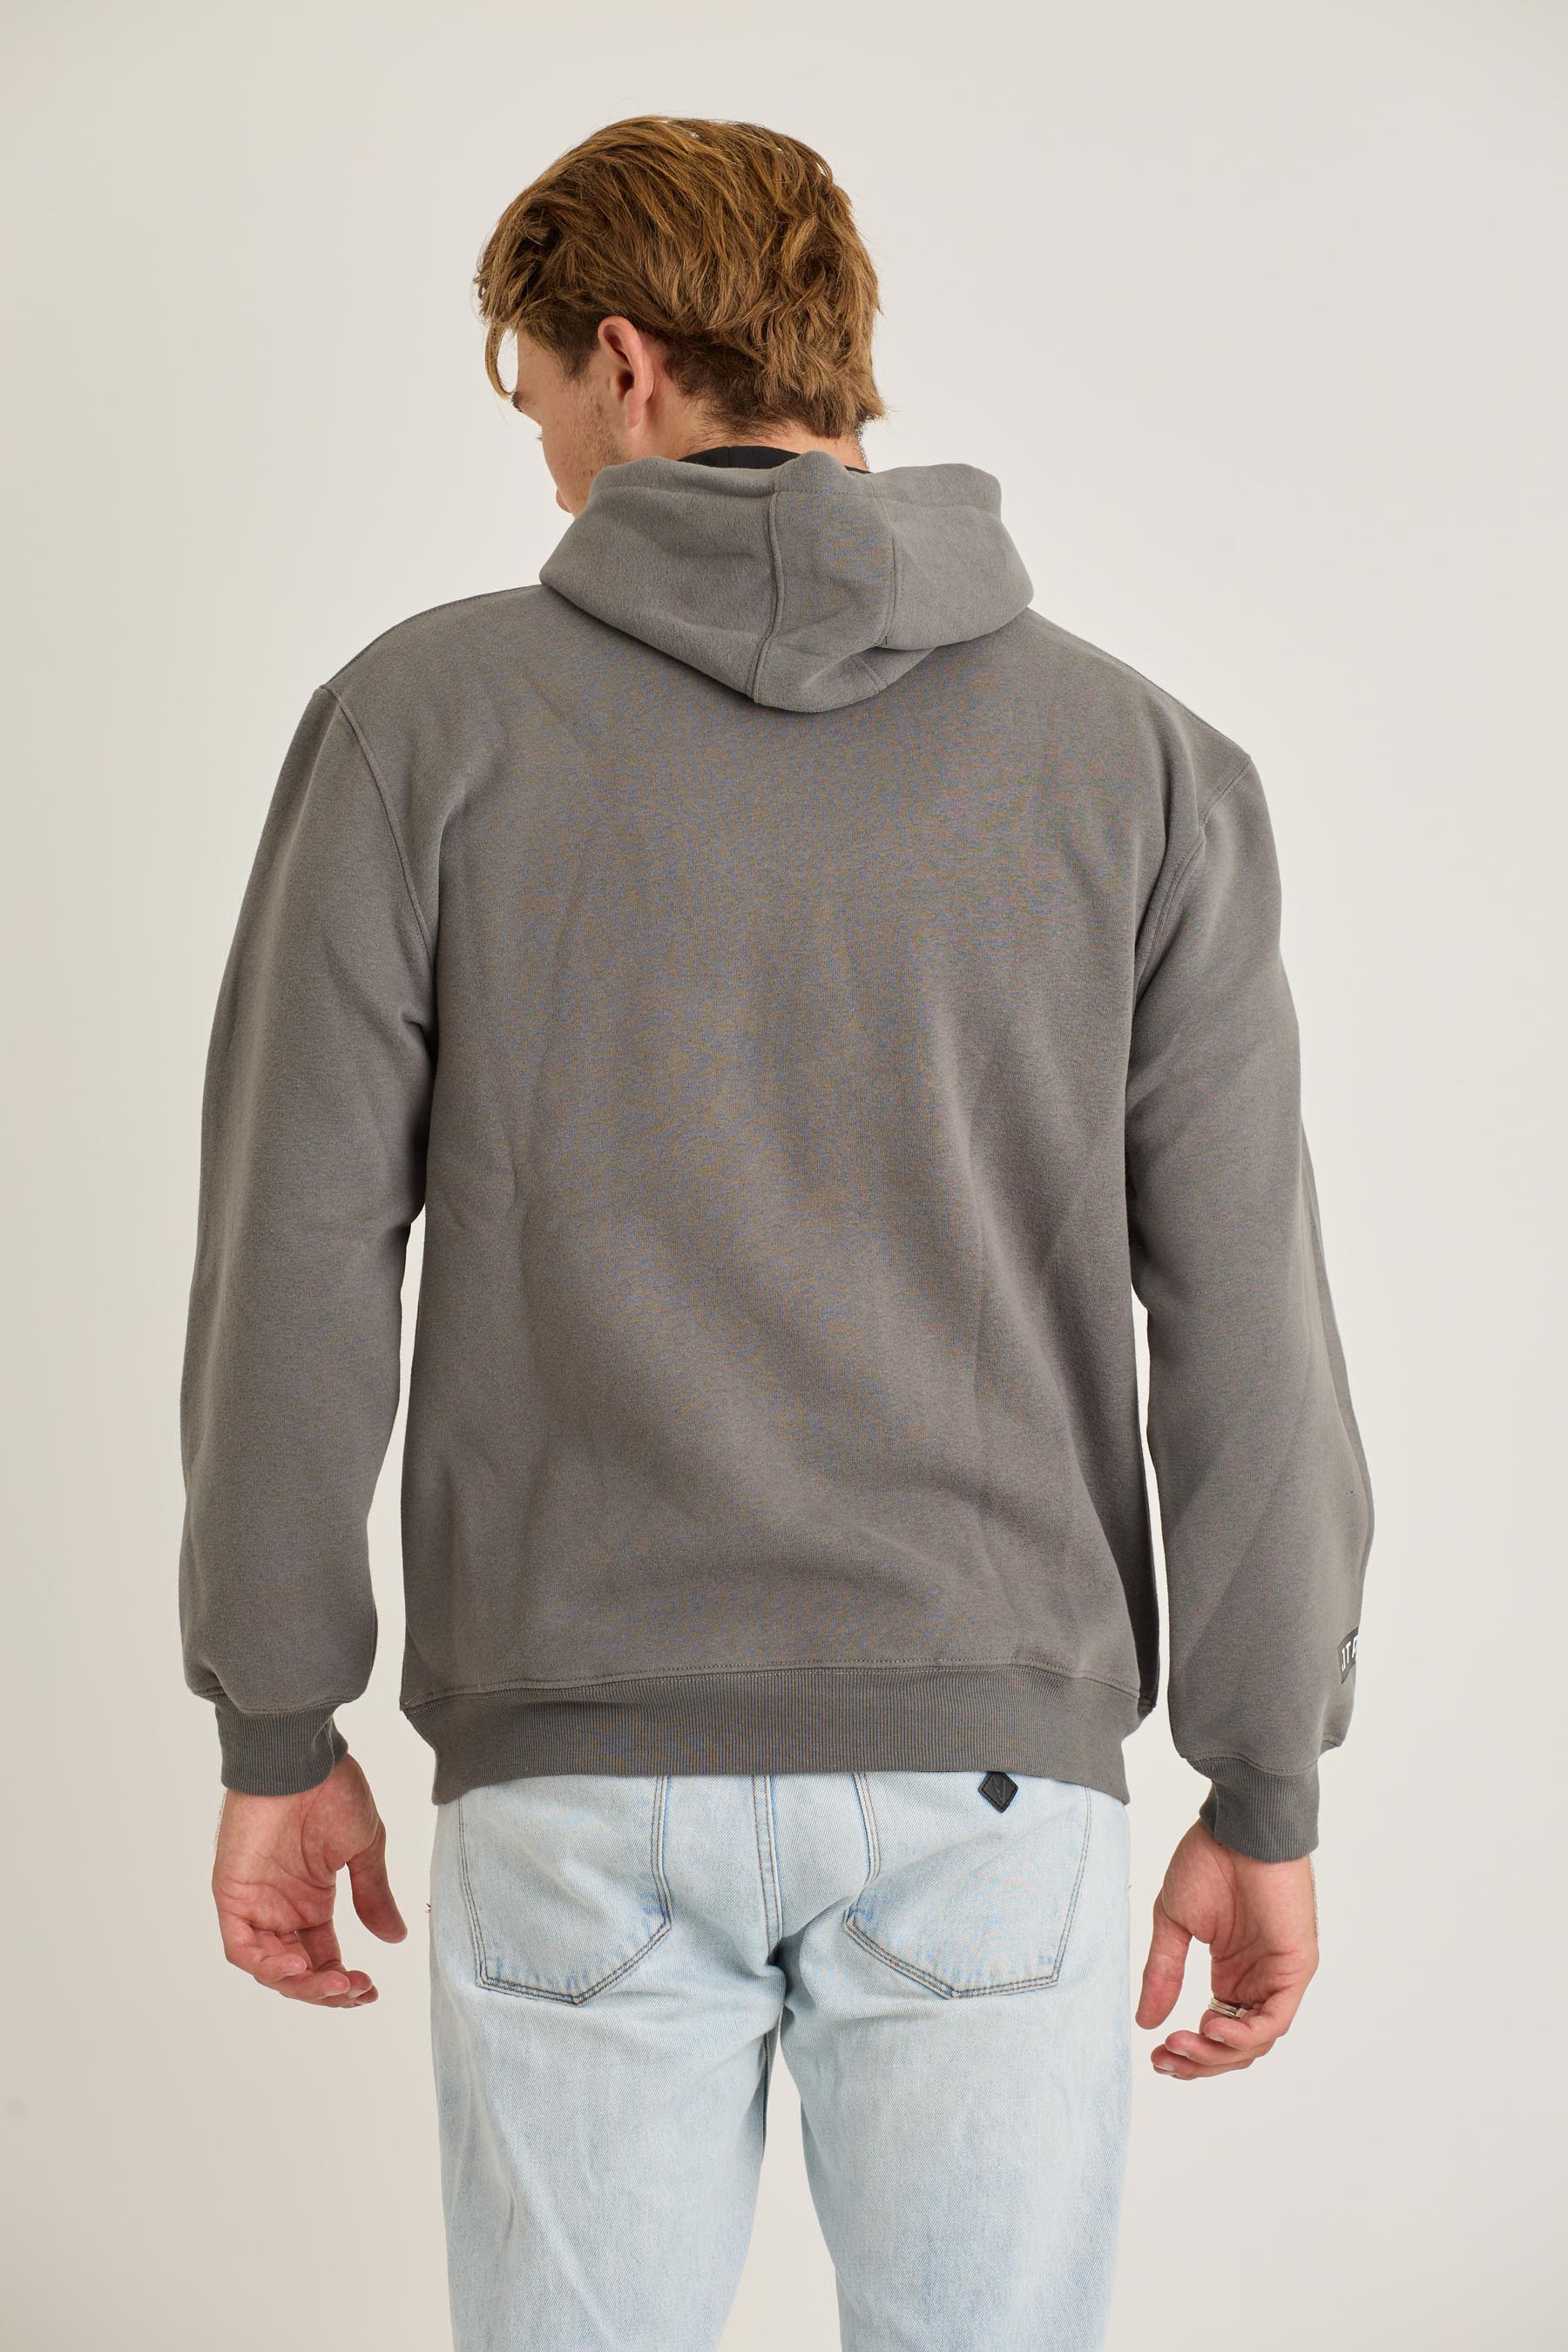 Jetpilot Corp Mens Pullover - Charcoal 5